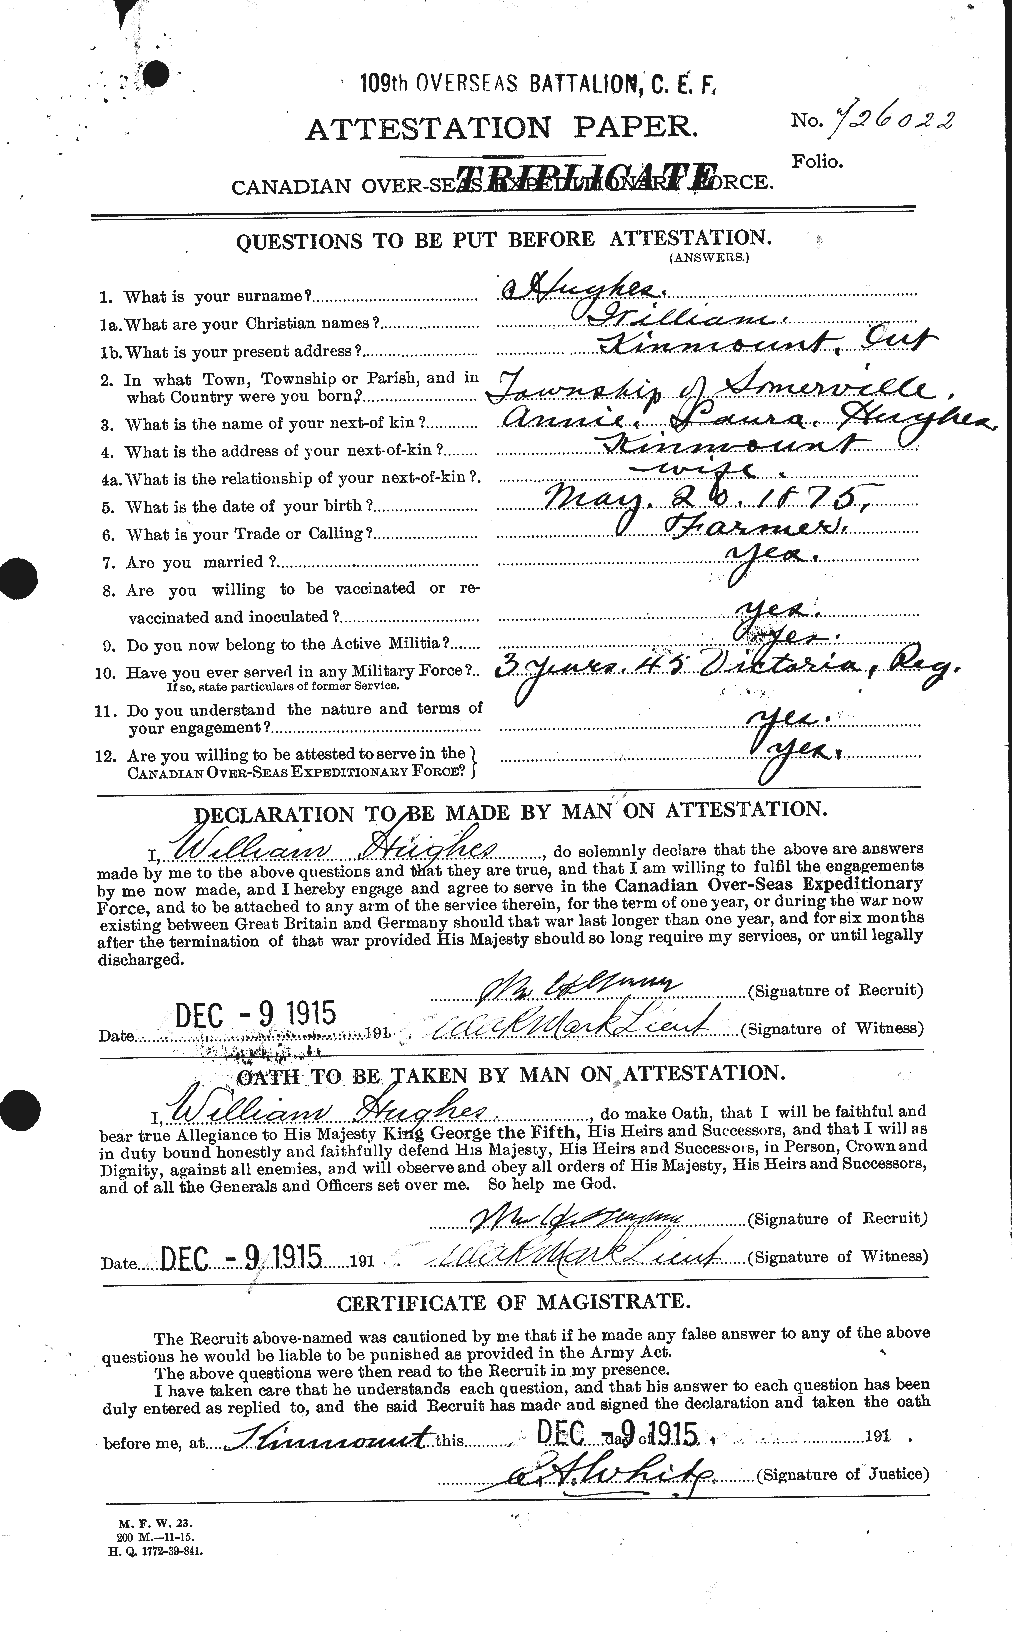 Personnel Records of the First World War - CEF 405903a